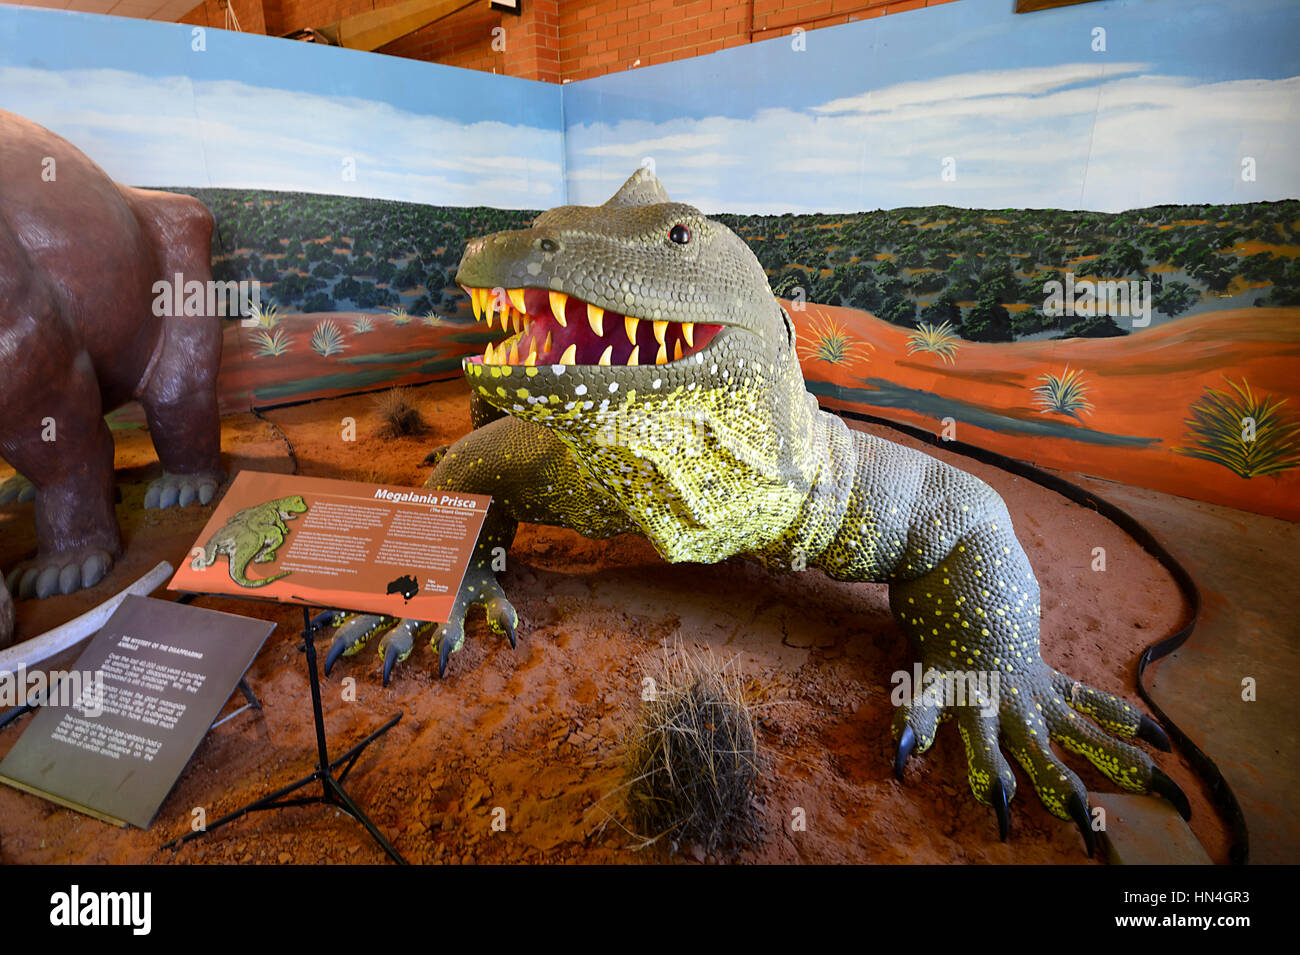 Riesige Goanna (Megalania Prisca), Pioneers Museum, Wentworth, New South Wales, Australien Stockfoto